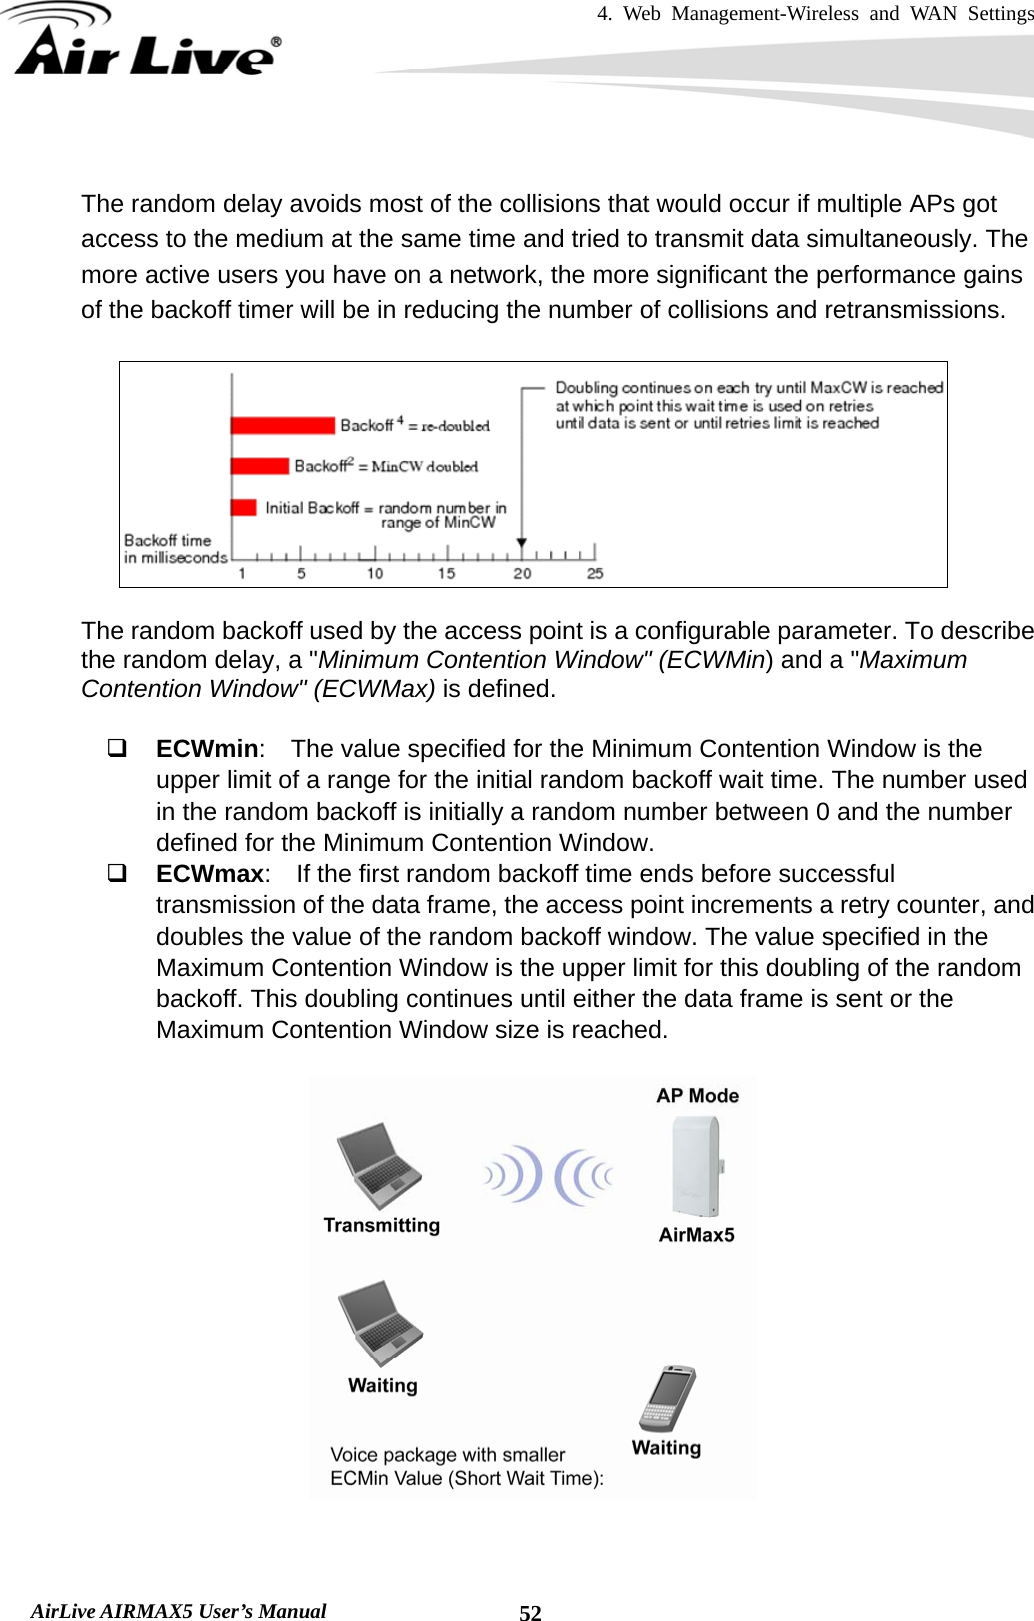 4. Web Management-Wireless and WAN Settings   AirLive AIRMAX5 User’s Manual  52 The random delay avoids most of the collisions that would occur if multiple APs got access to the medium at the same time and tried to transmit data simultaneously. The more active users you have on a network, the more significant the performance gains of the backoff timer will be in reducing the number of collisions and retransmissions.    The random backoff used by the access point is a configurable parameter. To describe the random delay, a &quot;Minimum Contention Window&quot; (ECWMin) and a &quot;Maximum Contention Window&quot; (ECWMax) is defined.   ECWmin:    The value specified for the Minimum Contention Window is the upper limit of a range for the initial random backoff wait time. The number used in the random backoff is initially a random number between 0 and the number defined for the Minimum Contention Window.  ECWmax:  If the first random backoff time ends before successful transmission of the data frame, the access point increments a retry counter, and doubles the value of the random backoff window. The value specified in the Maximum Contention Window is the upper limit for this doubling of the random backoff. This doubling continues until either the data frame is sent or the Maximum Contention Window size is reached.     